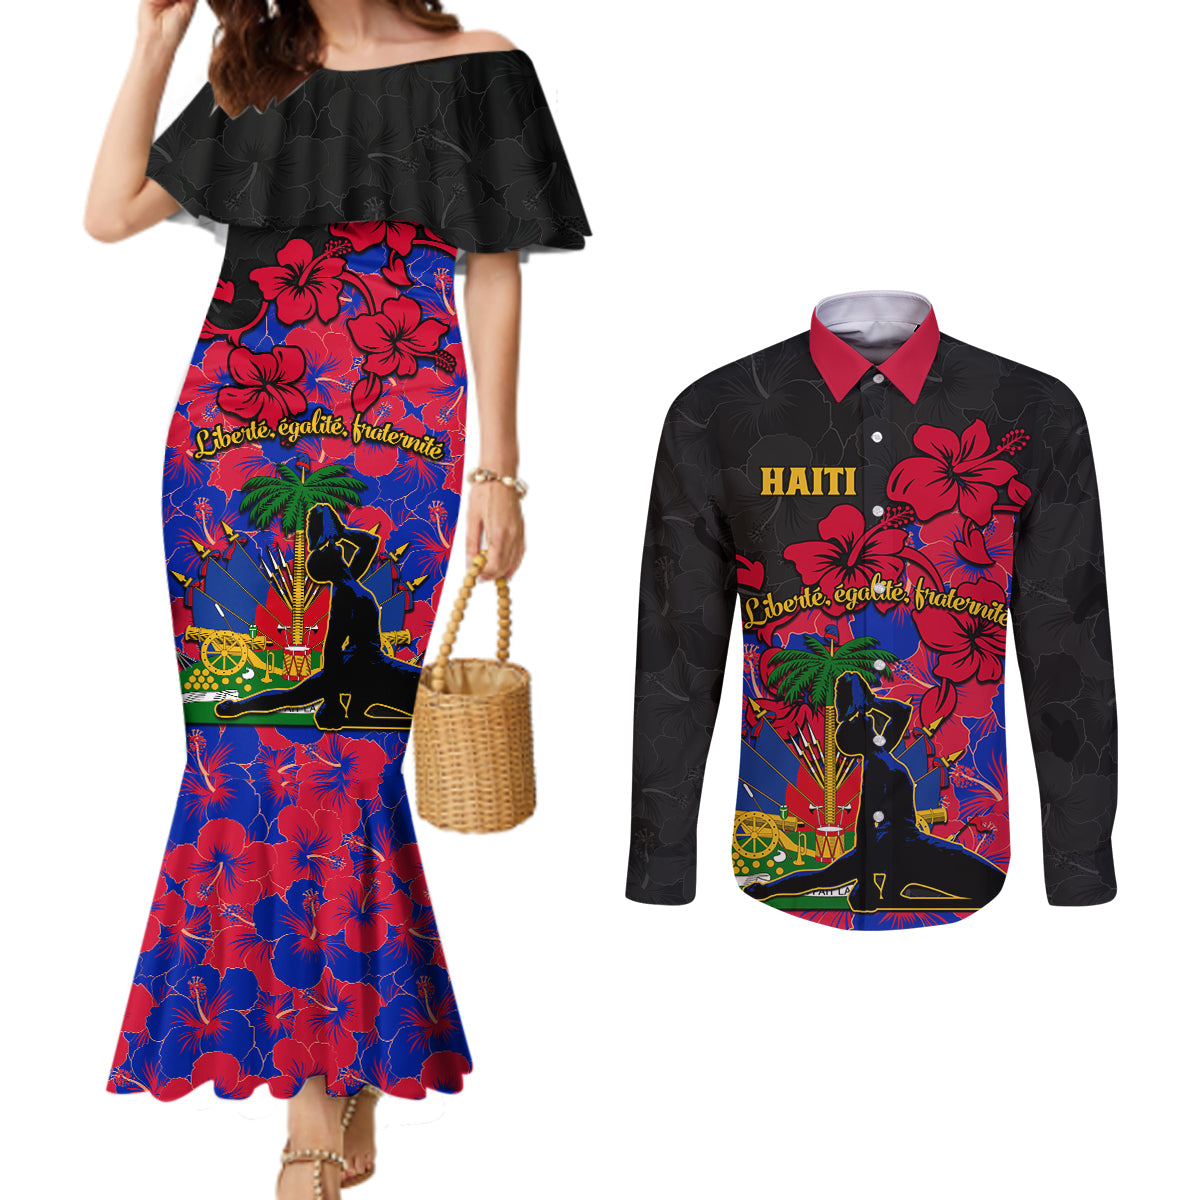 haiti-independence-day-couples-matching-mermaid-dress-and-long-sleeve-button-shirt-hibiscus-neg-marron